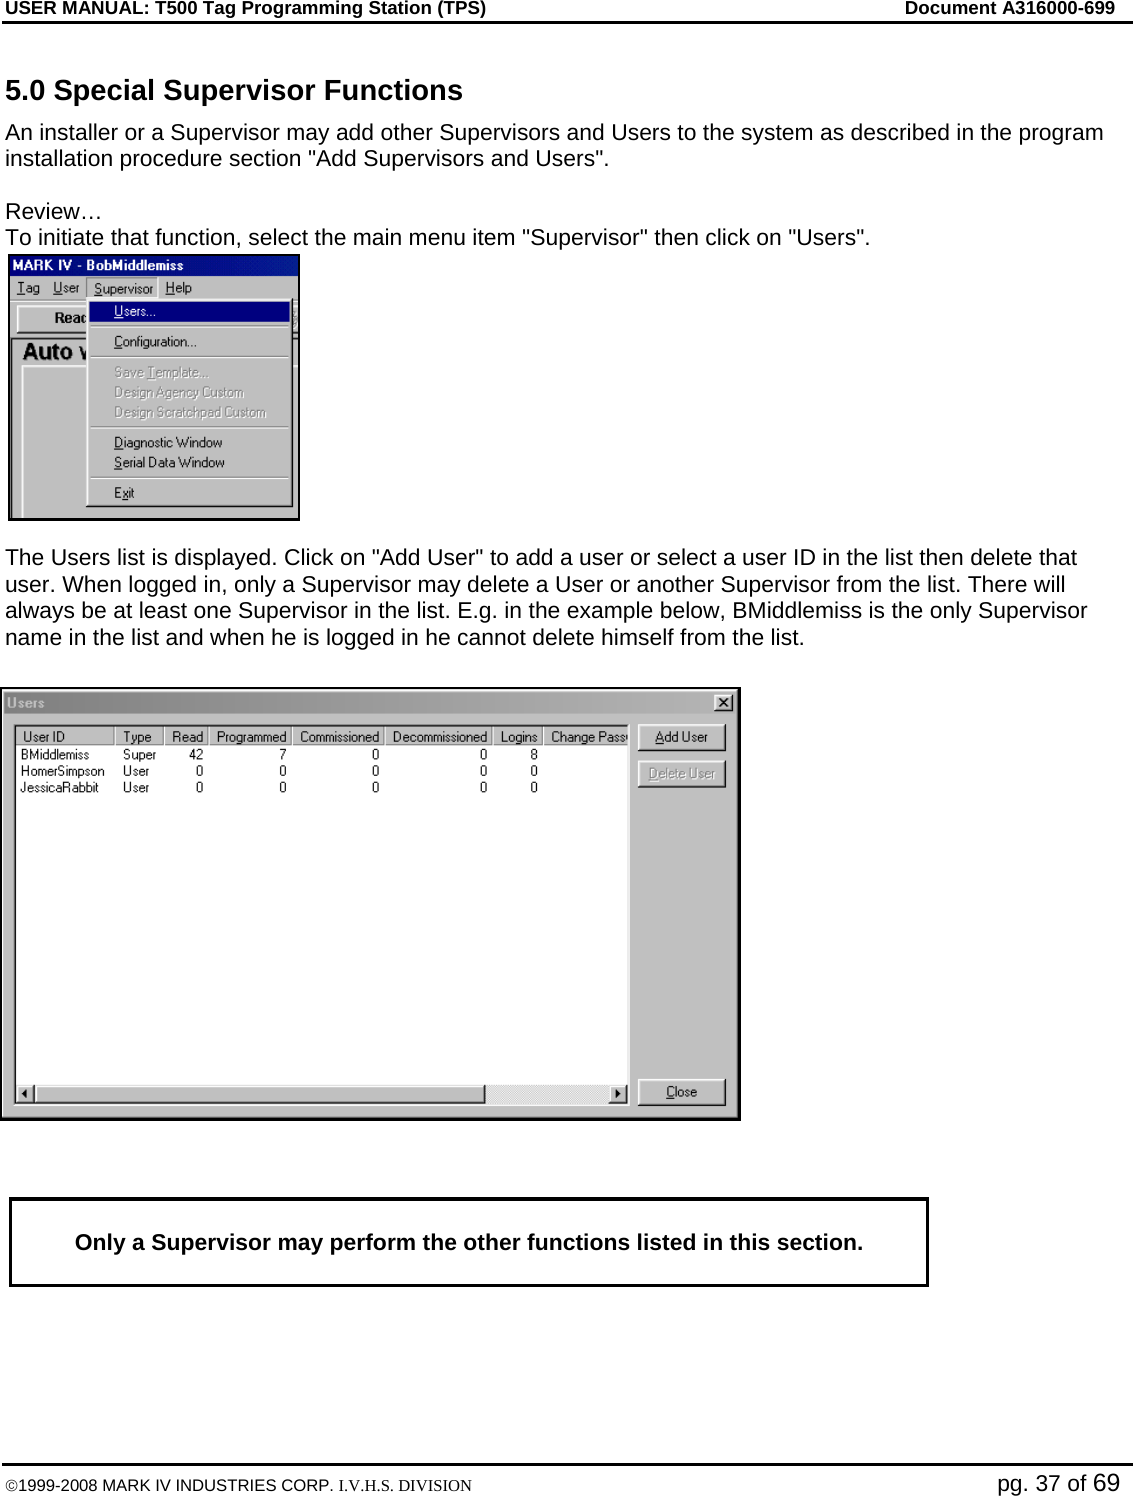 USER MANUAL: T500 Tag Programming Station (TPS)     Document A316000-699  ©1999-2008 MARK IV INDUSTRIES CORP. I.V.H.S. DIVISION   pg. 37 of 69 5.0 Special Supervisor Functions An installer or a Supervisor may add other Supervisors and Users to the system as described in the program installation procedure section &quot;Add Supervisors and Users&quot;.  Review… To initiate that function, select the main menu item &quot;Supervisor&quot; then click on &quot;Users&quot;.   The Users list is displayed. Click on &quot;Add User&quot; to add a user or select a user ID in the list then delete that user. When logged in, only a Supervisor may delete a User or another Supervisor from the list. There will always be at least one Supervisor in the list. E.g. in the example below, BMiddlemiss is the only Supervisor name in the list and when he is logged in he cannot delete himself from the list.      Only a Supervisor may perform the other functions listed in this section.   